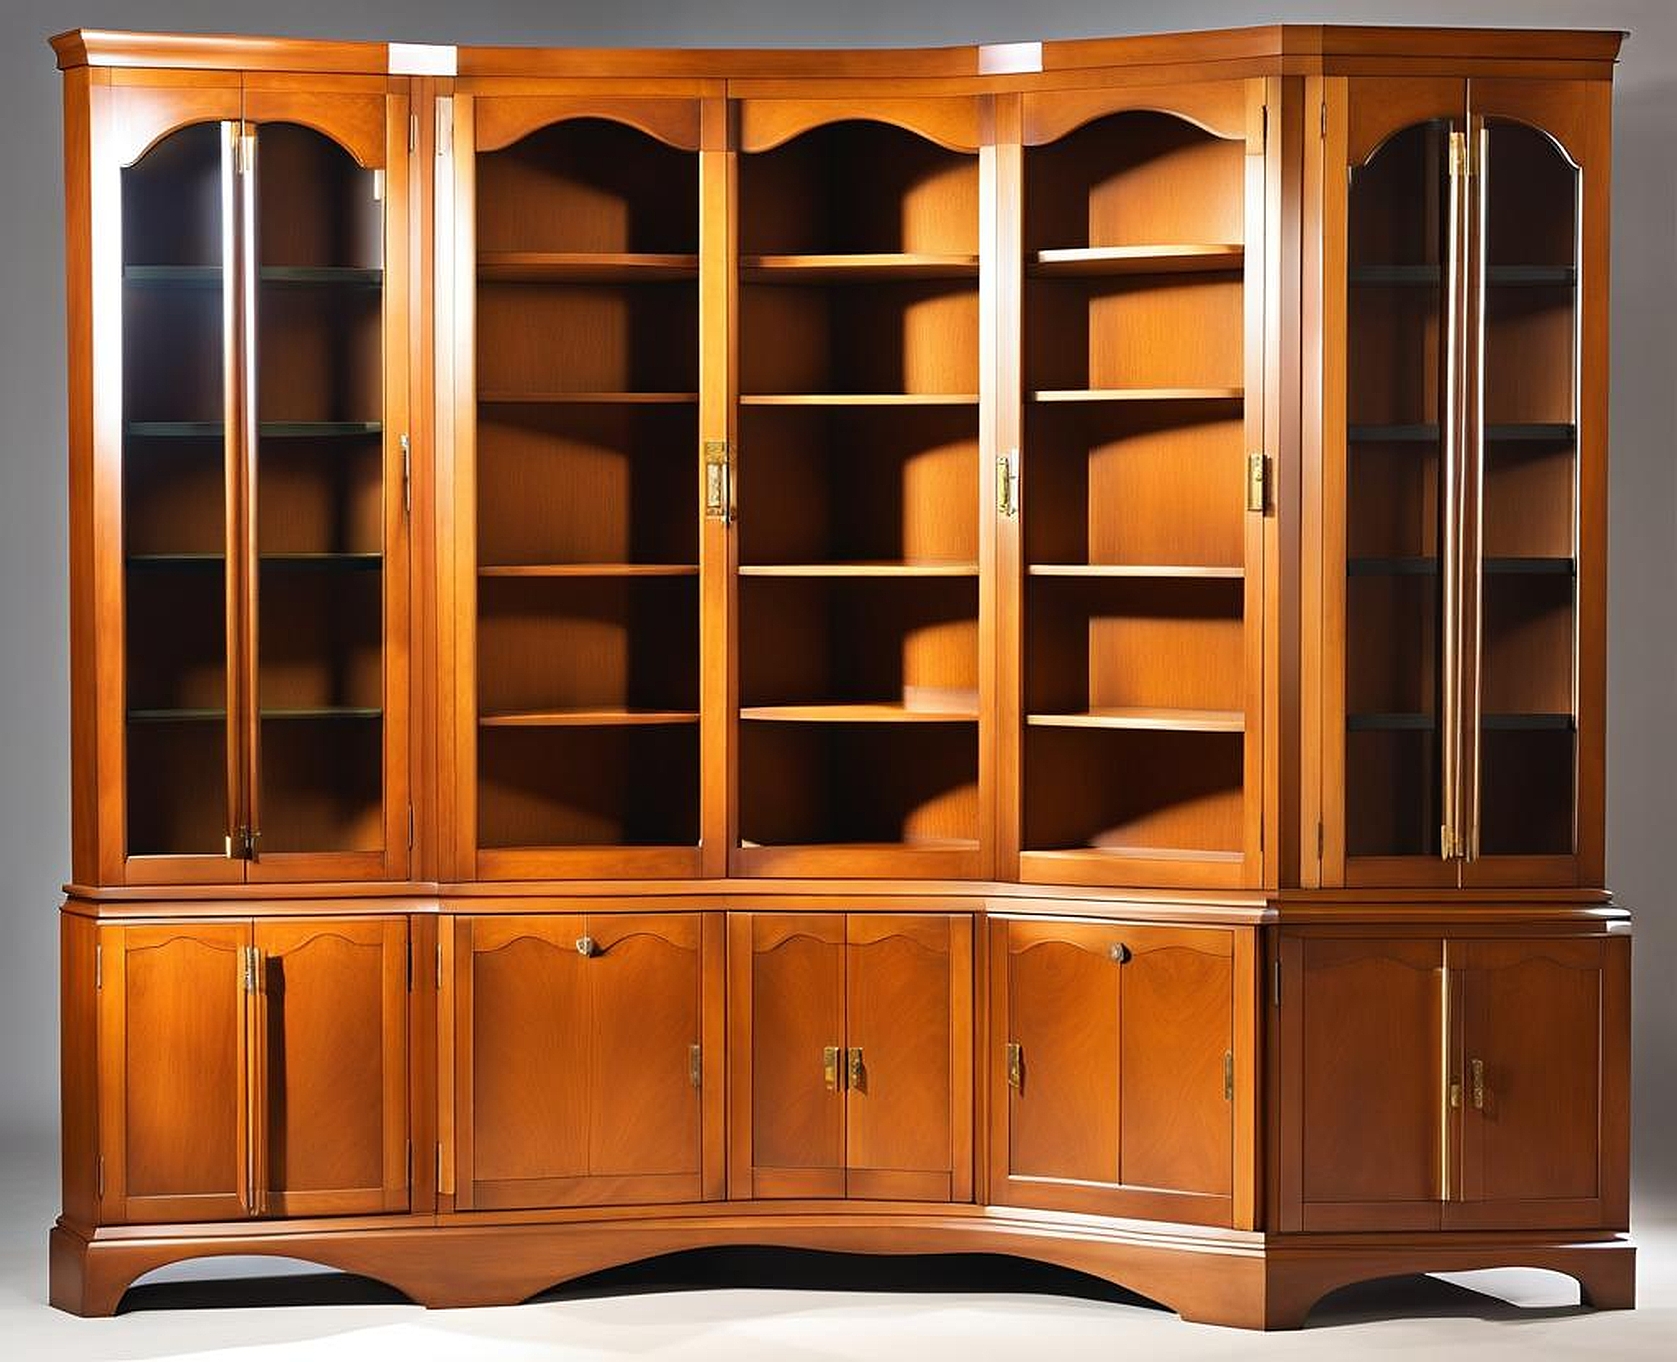 Heywood Wakefield Corner Cabinet Inspiration for a Beautiful and Functional Space